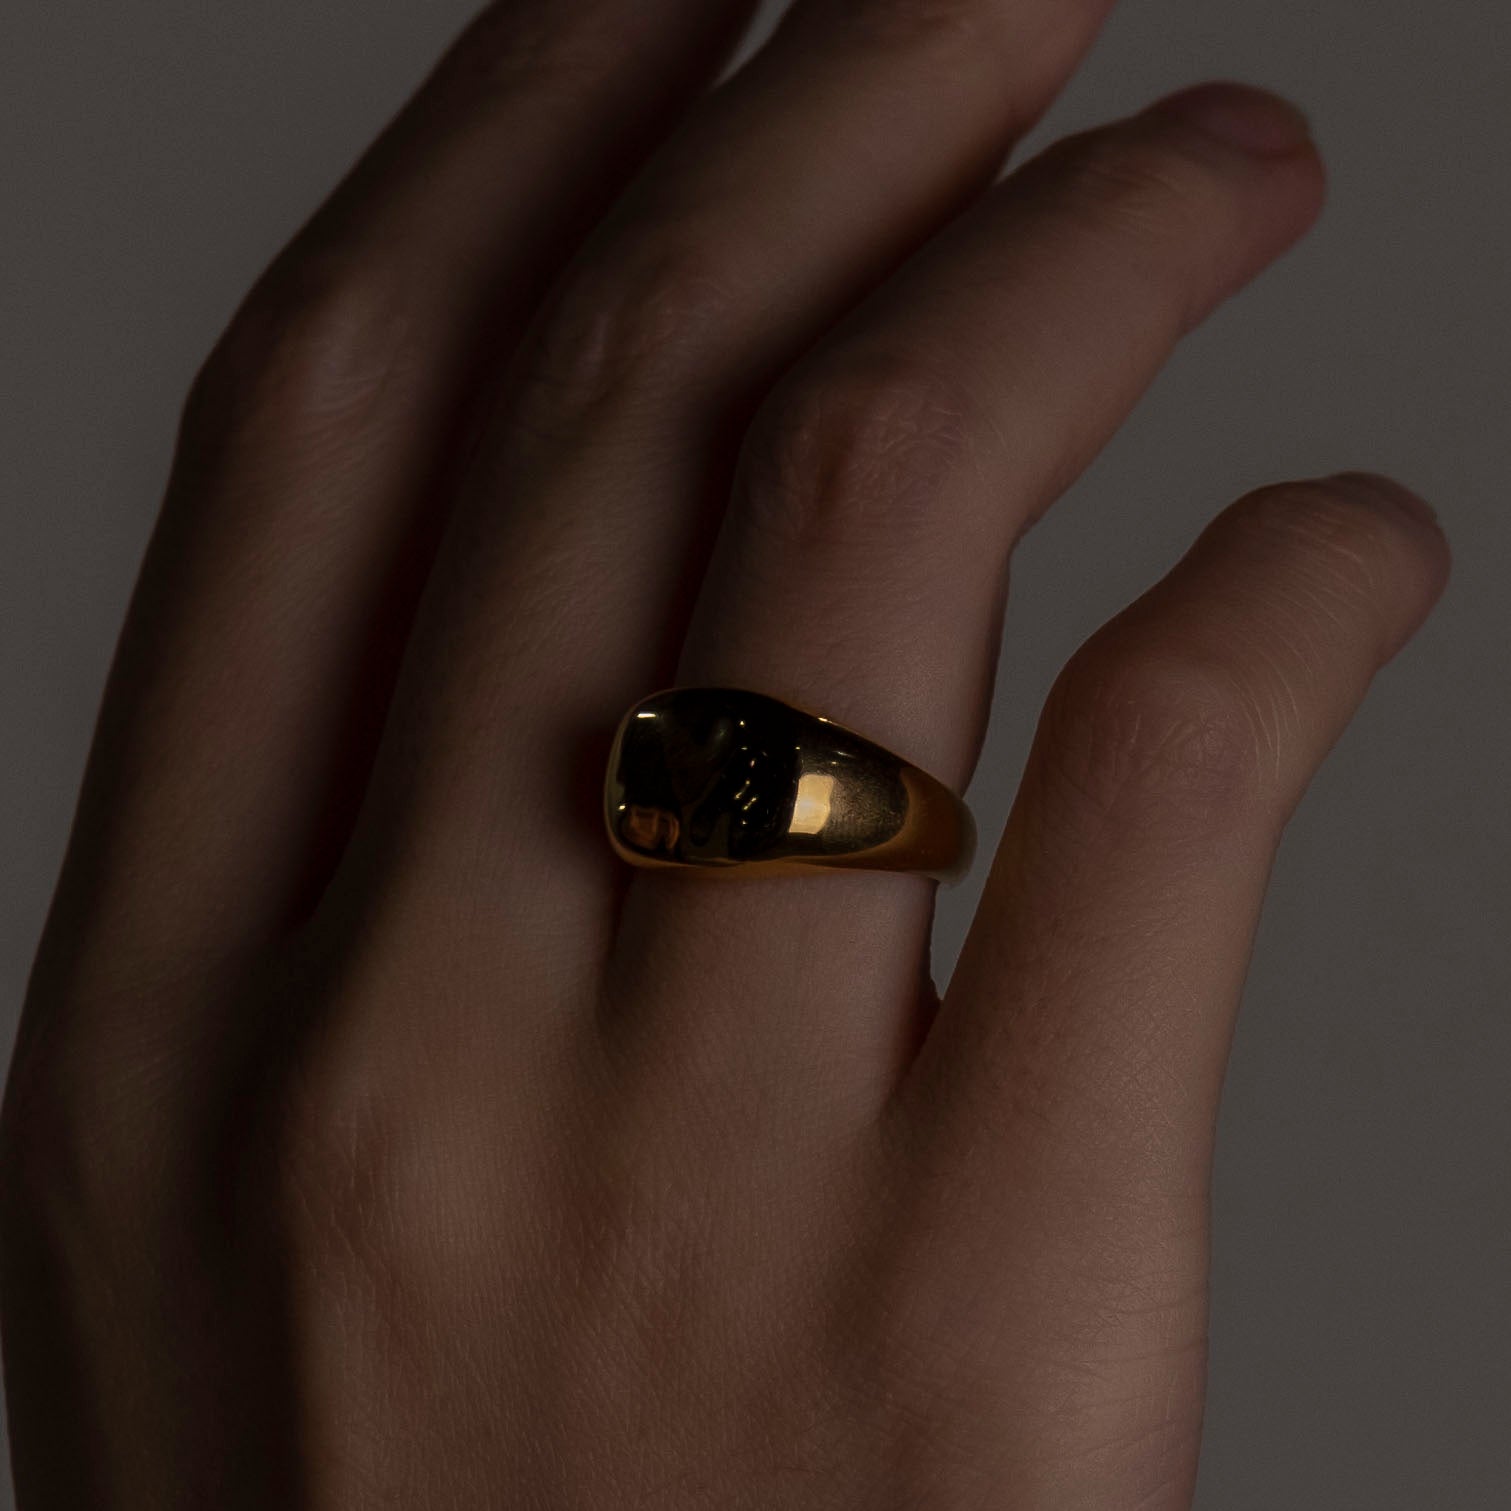 Square ring Gold